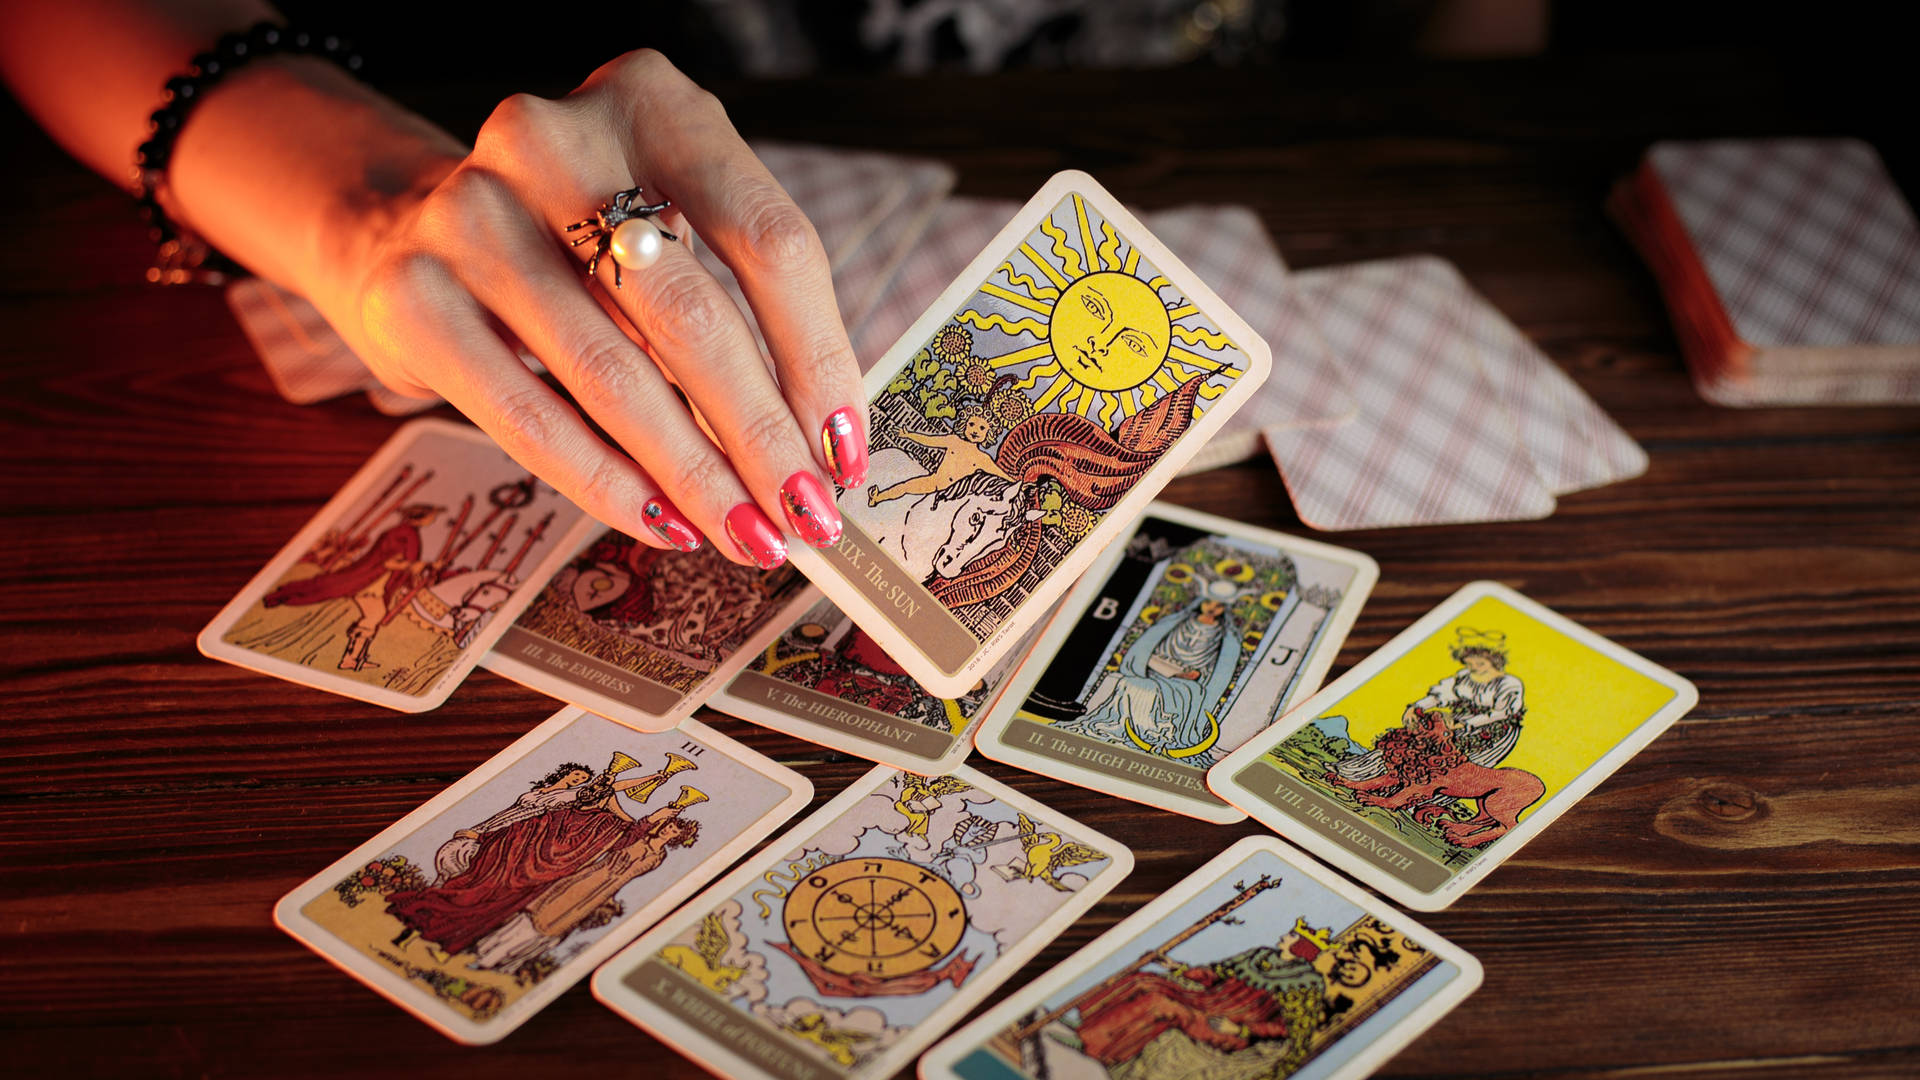 Paranormal Tarot Cards On Table